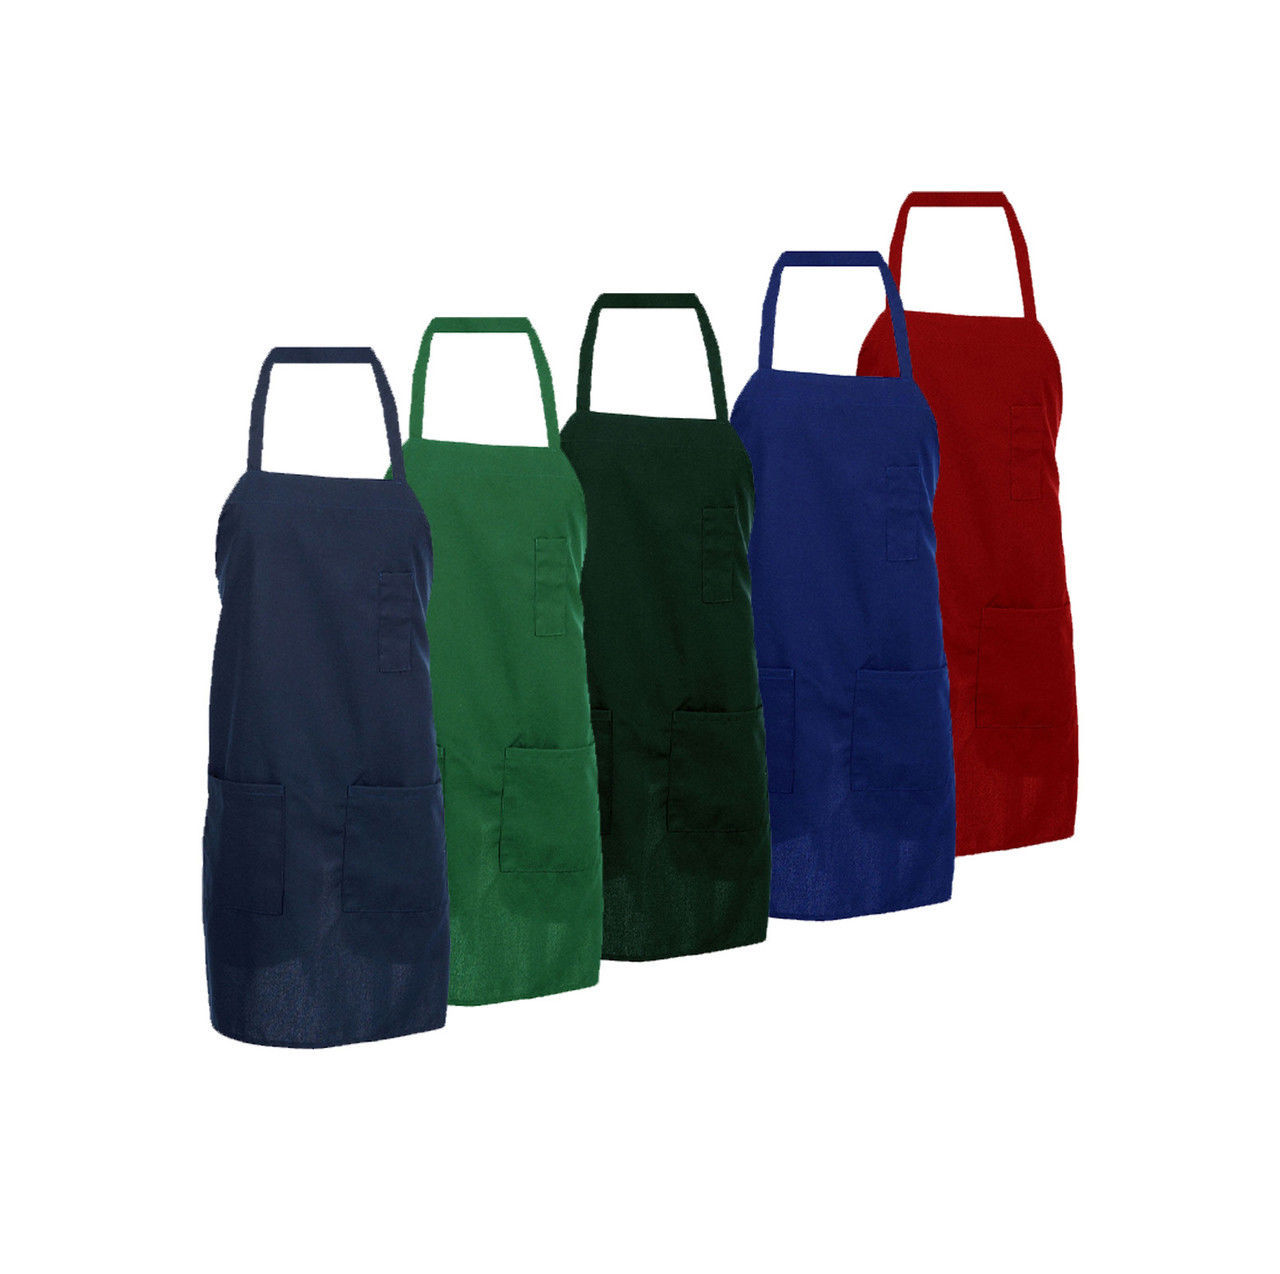 What are the features of the braid bib 3-Pocket Apron with Full Coverage?